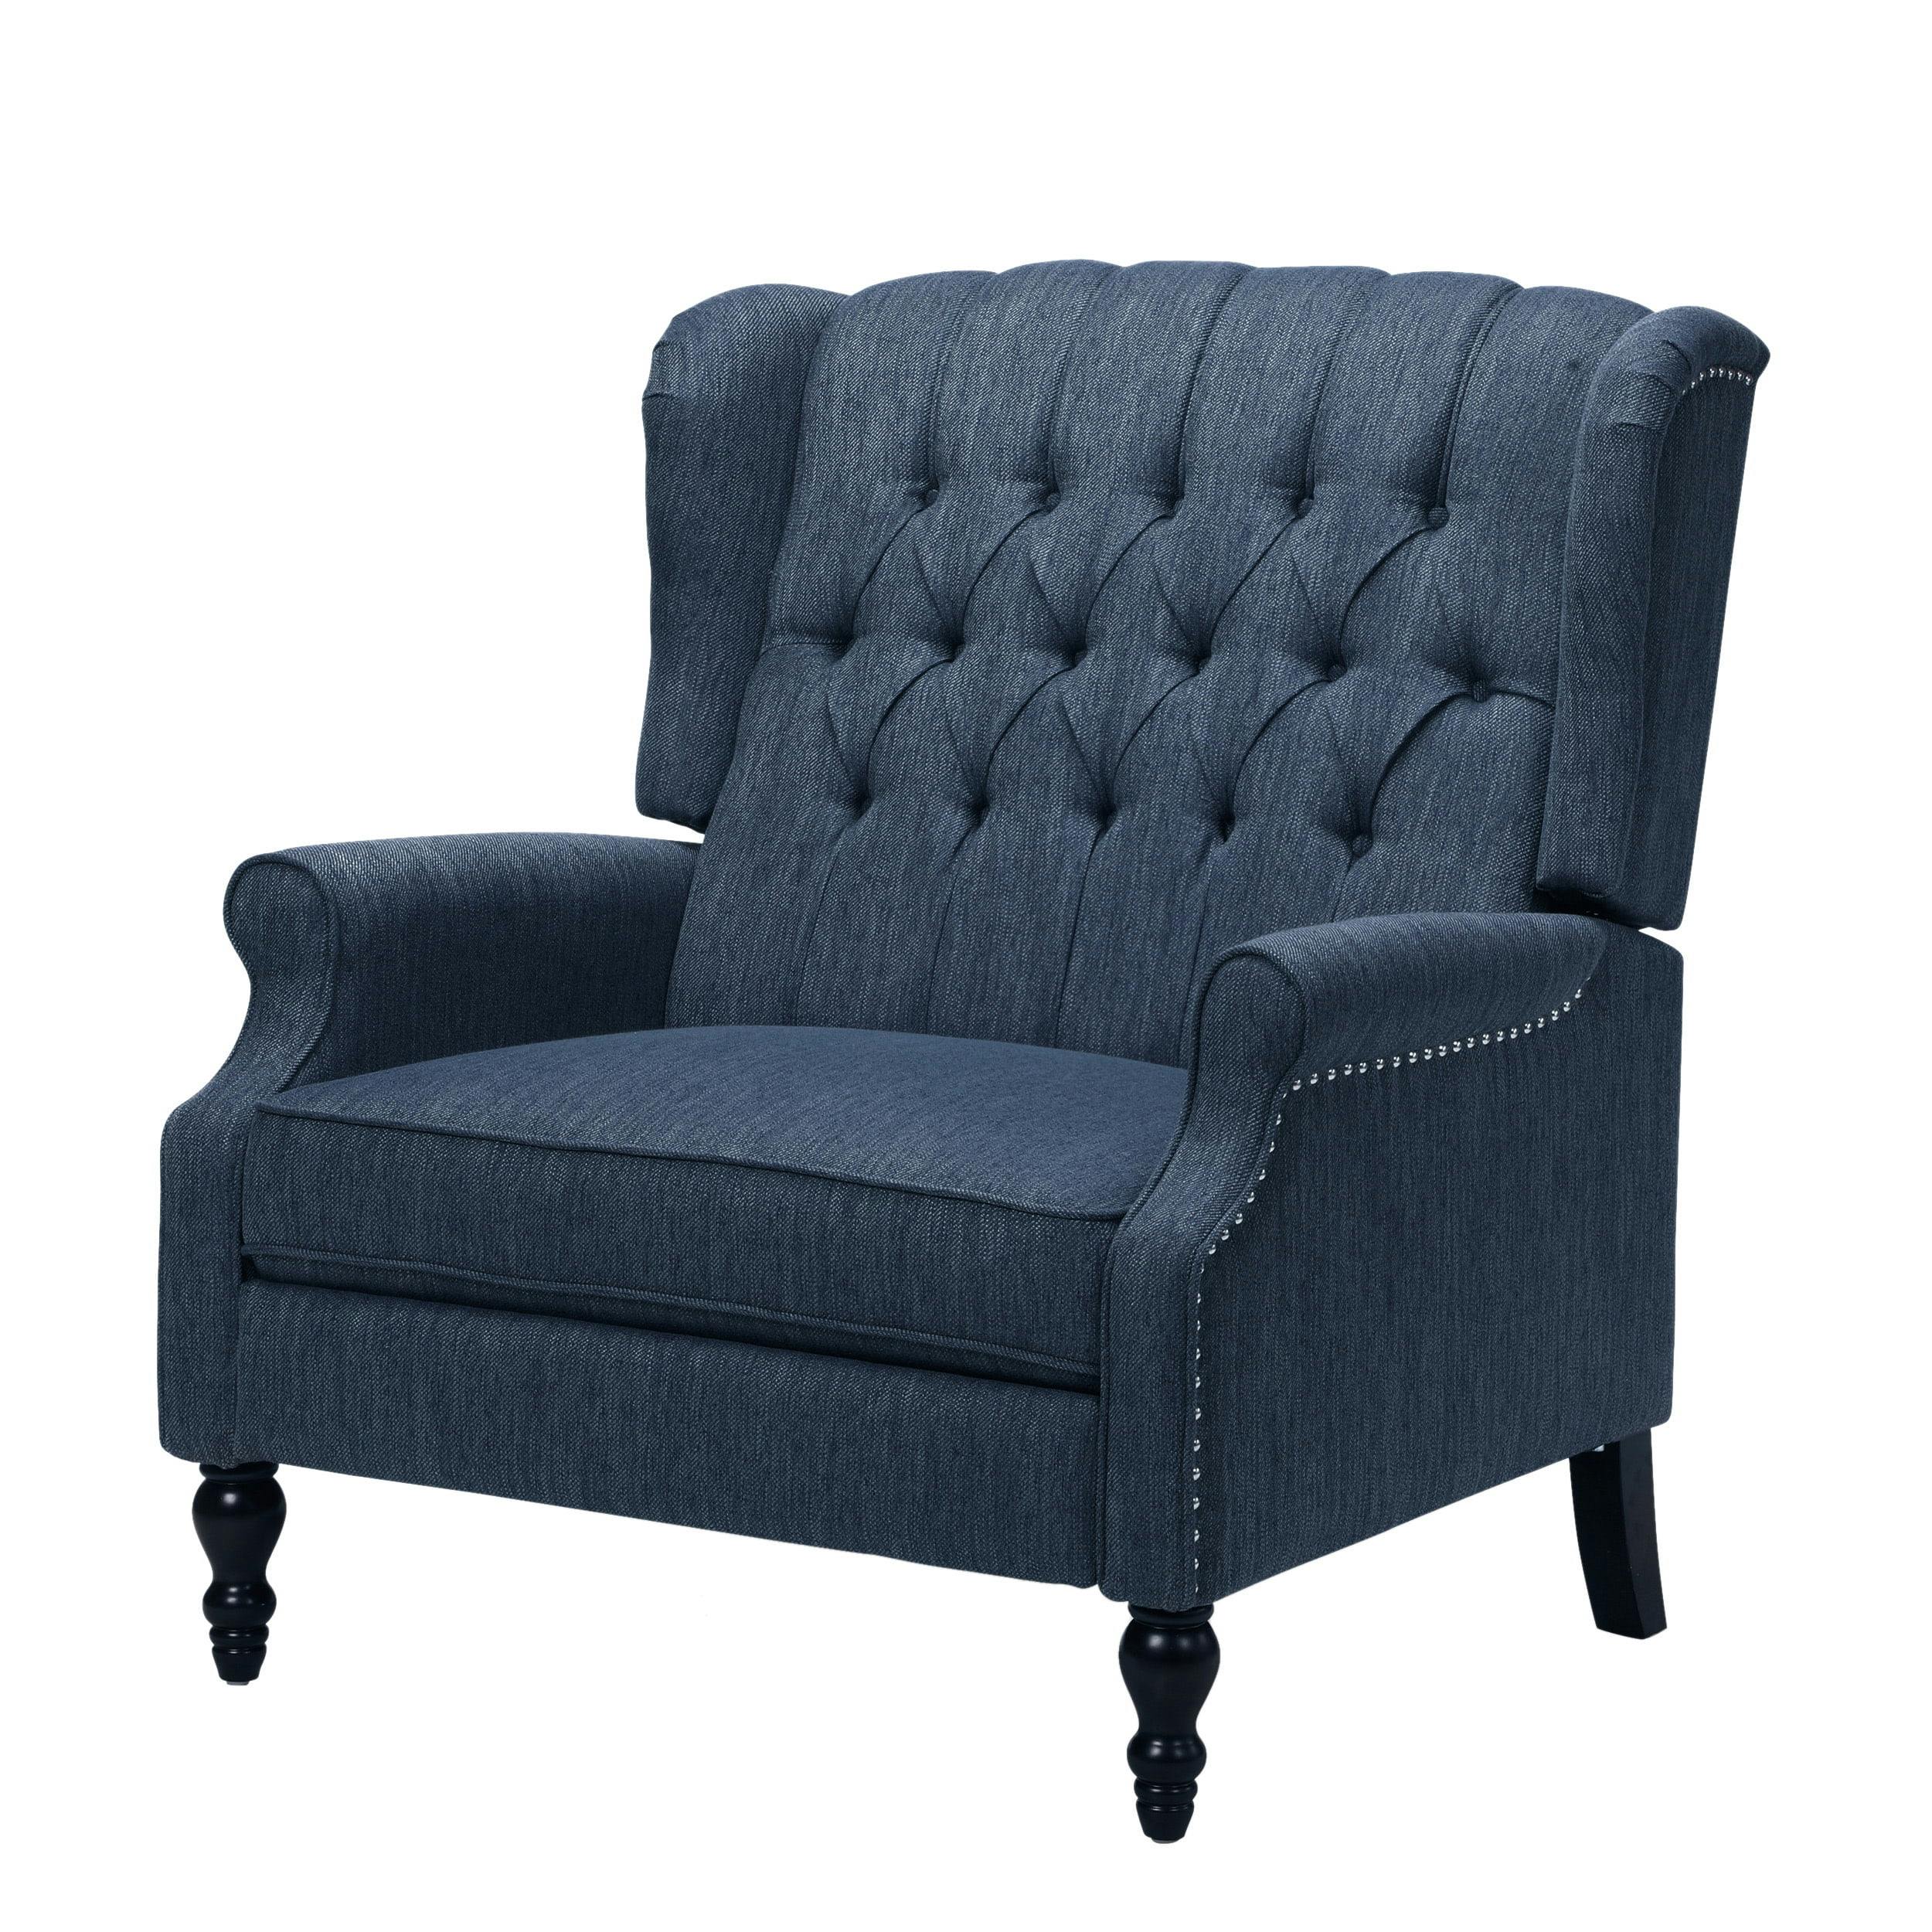 Handcrafted Navy Blue Oversized Wingback Recliner with Wood Accents